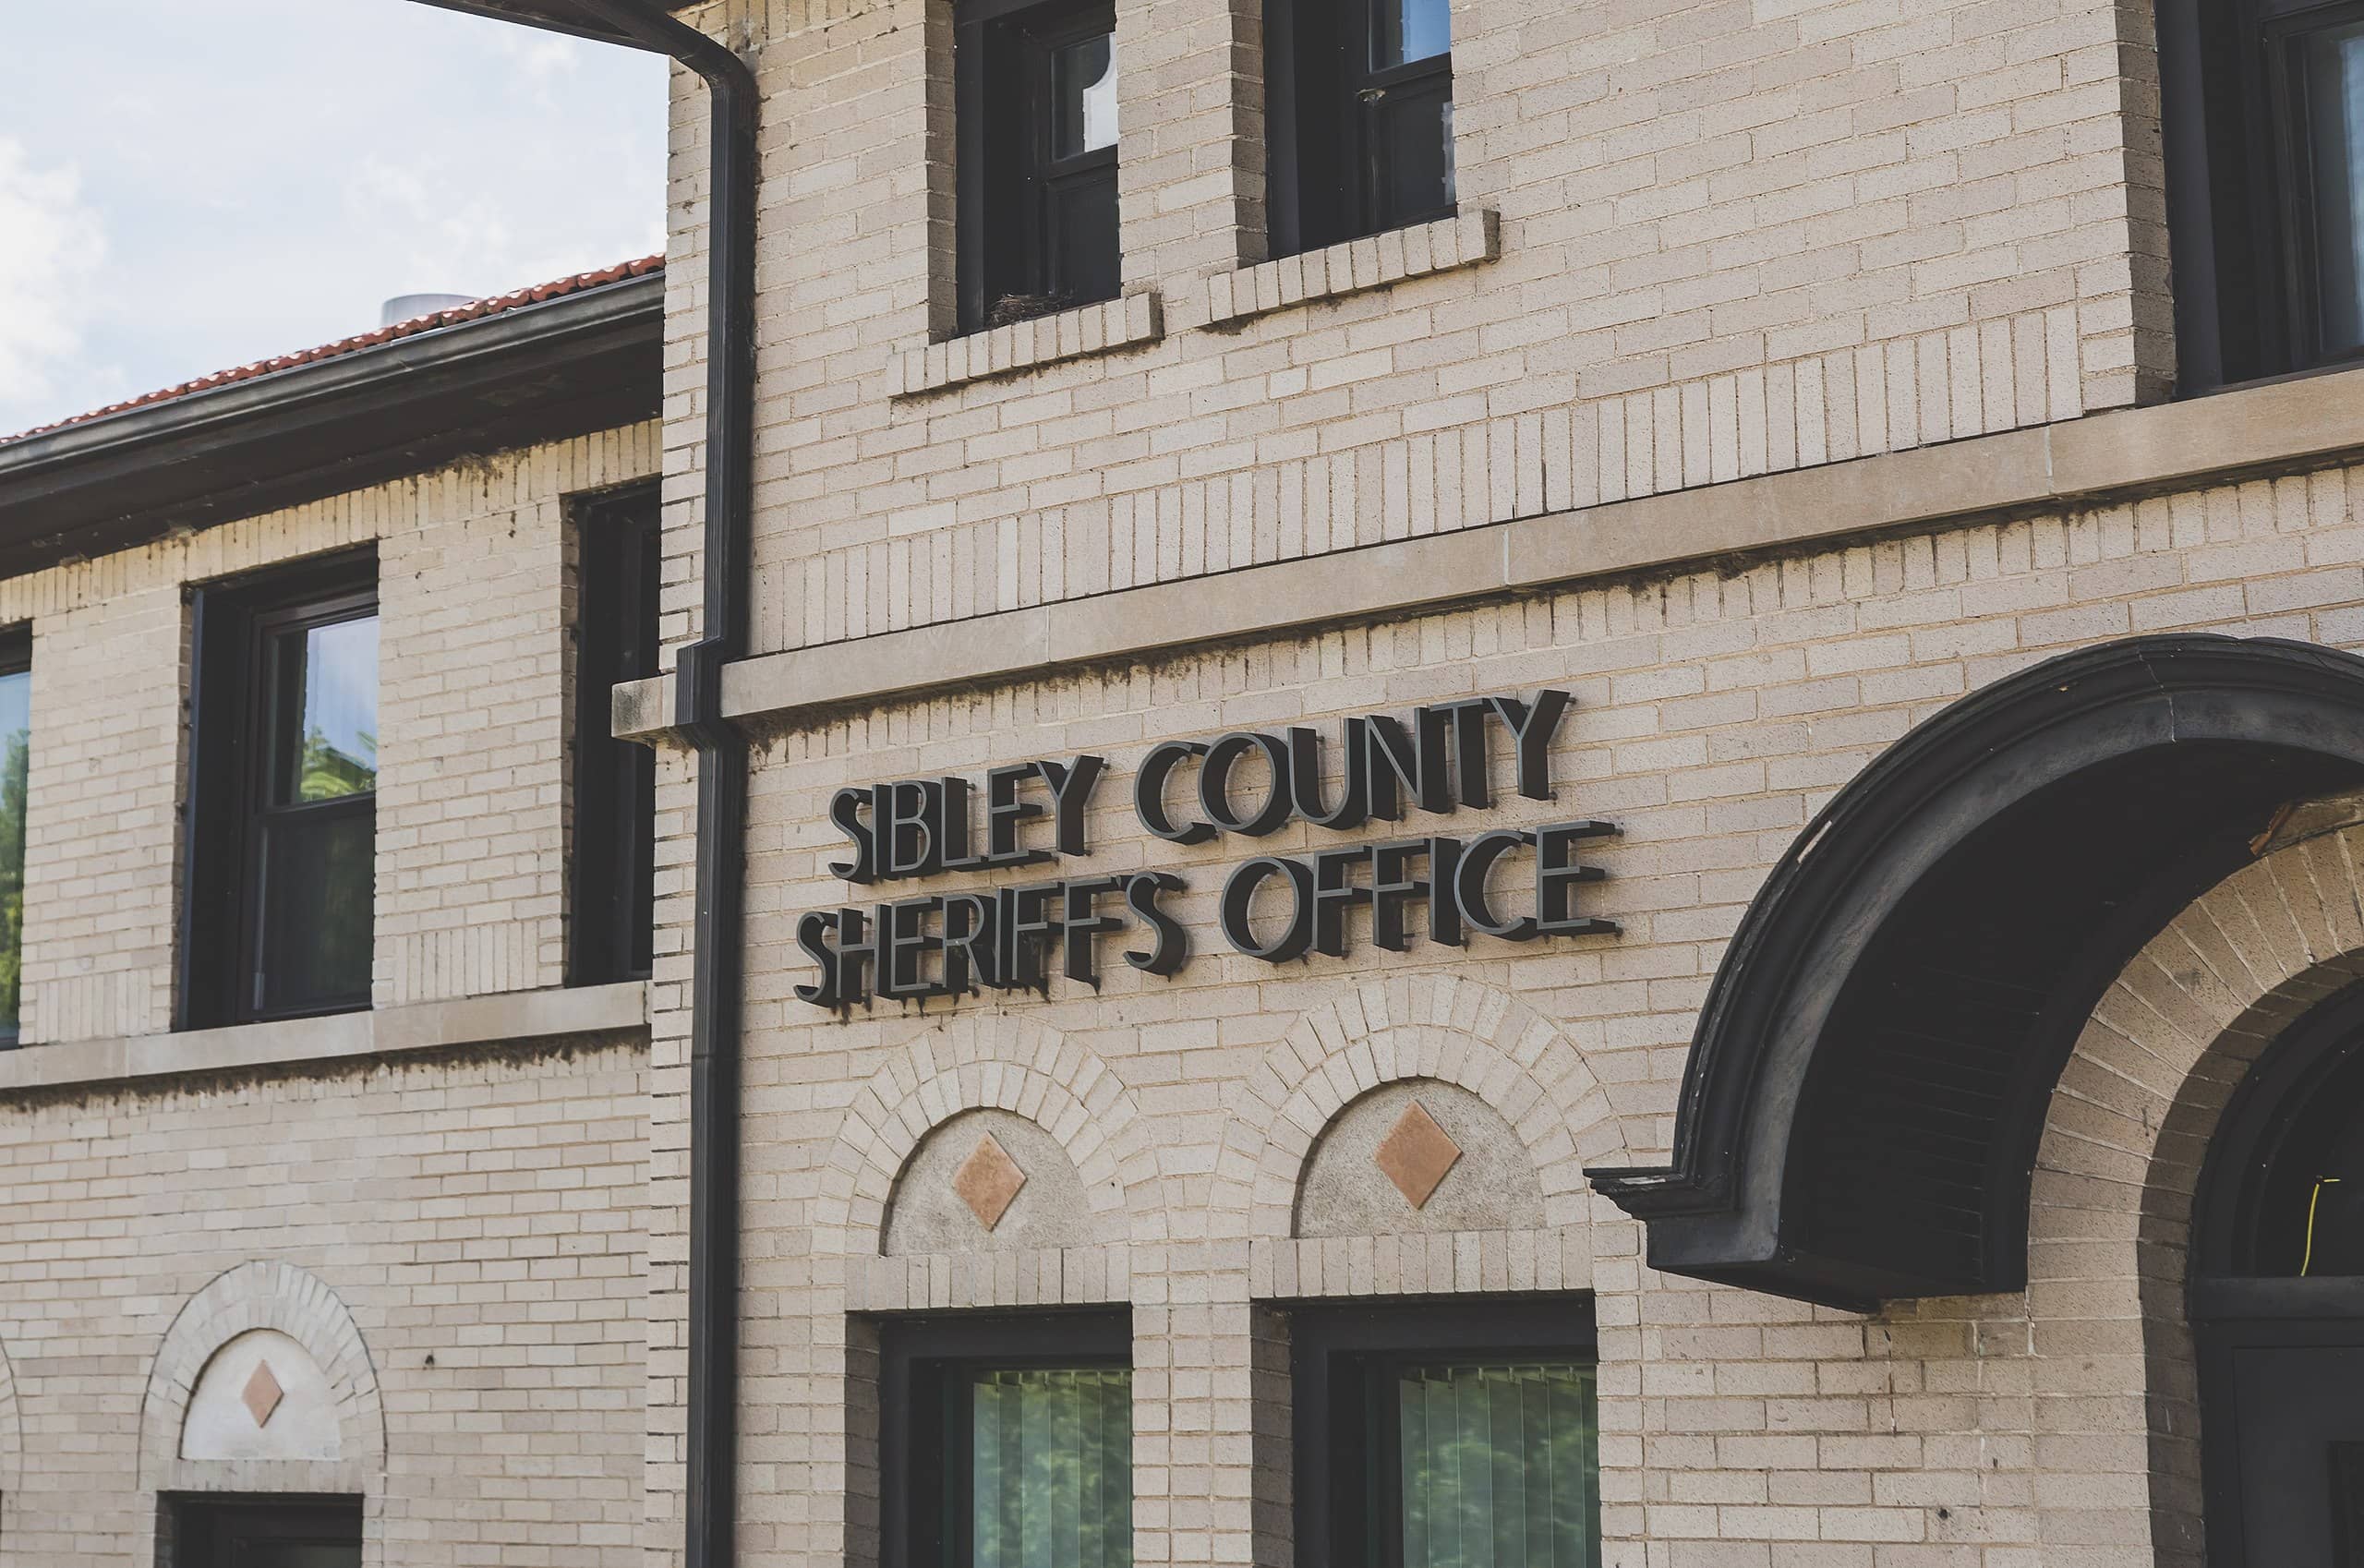 Image of Sibley County Sheriff's Office